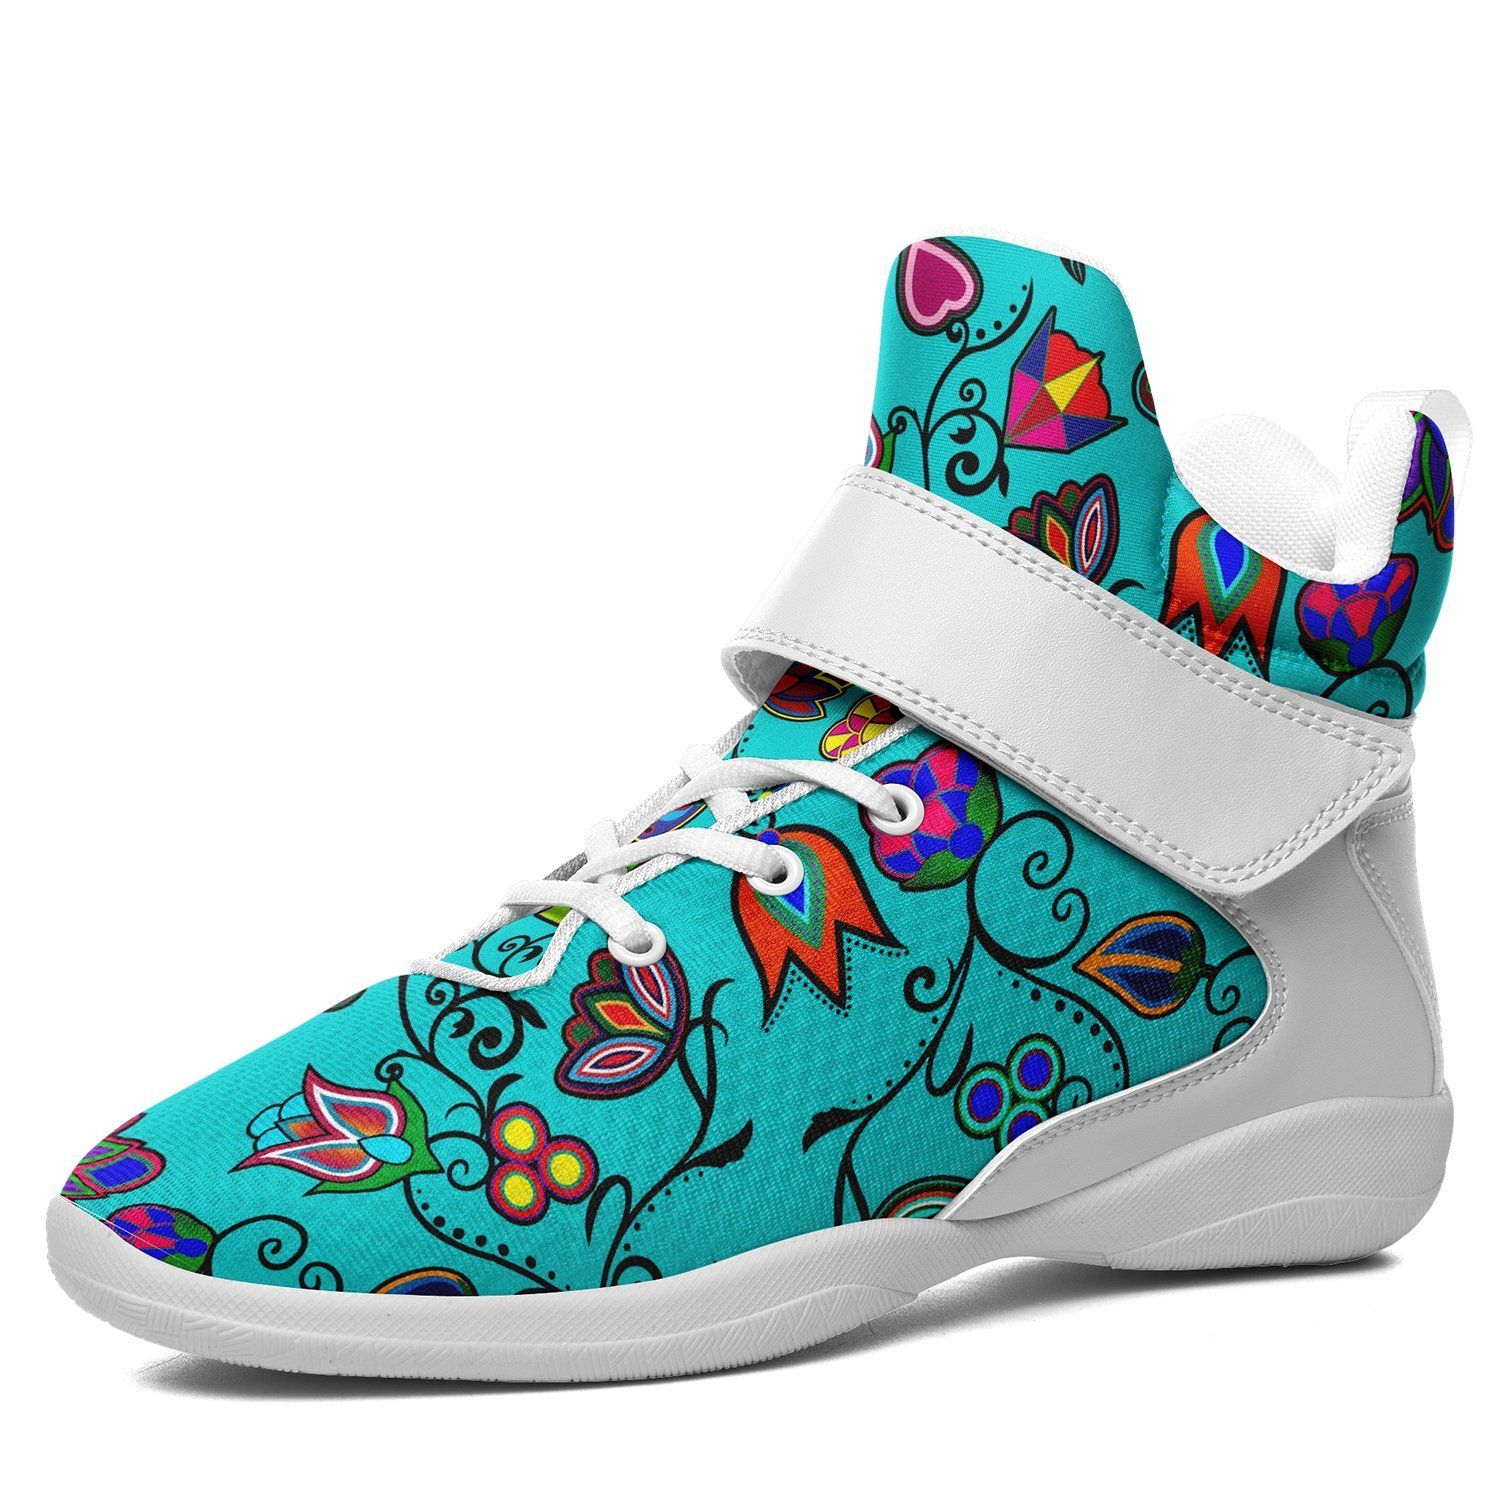 Indigenous Paisley Sky Ipottaa Basketball / Sport High Top Shoes - White Sole 49 Dzine US Women 8.5 / US Men 7 / EUR 40 White Sole with White Strap 